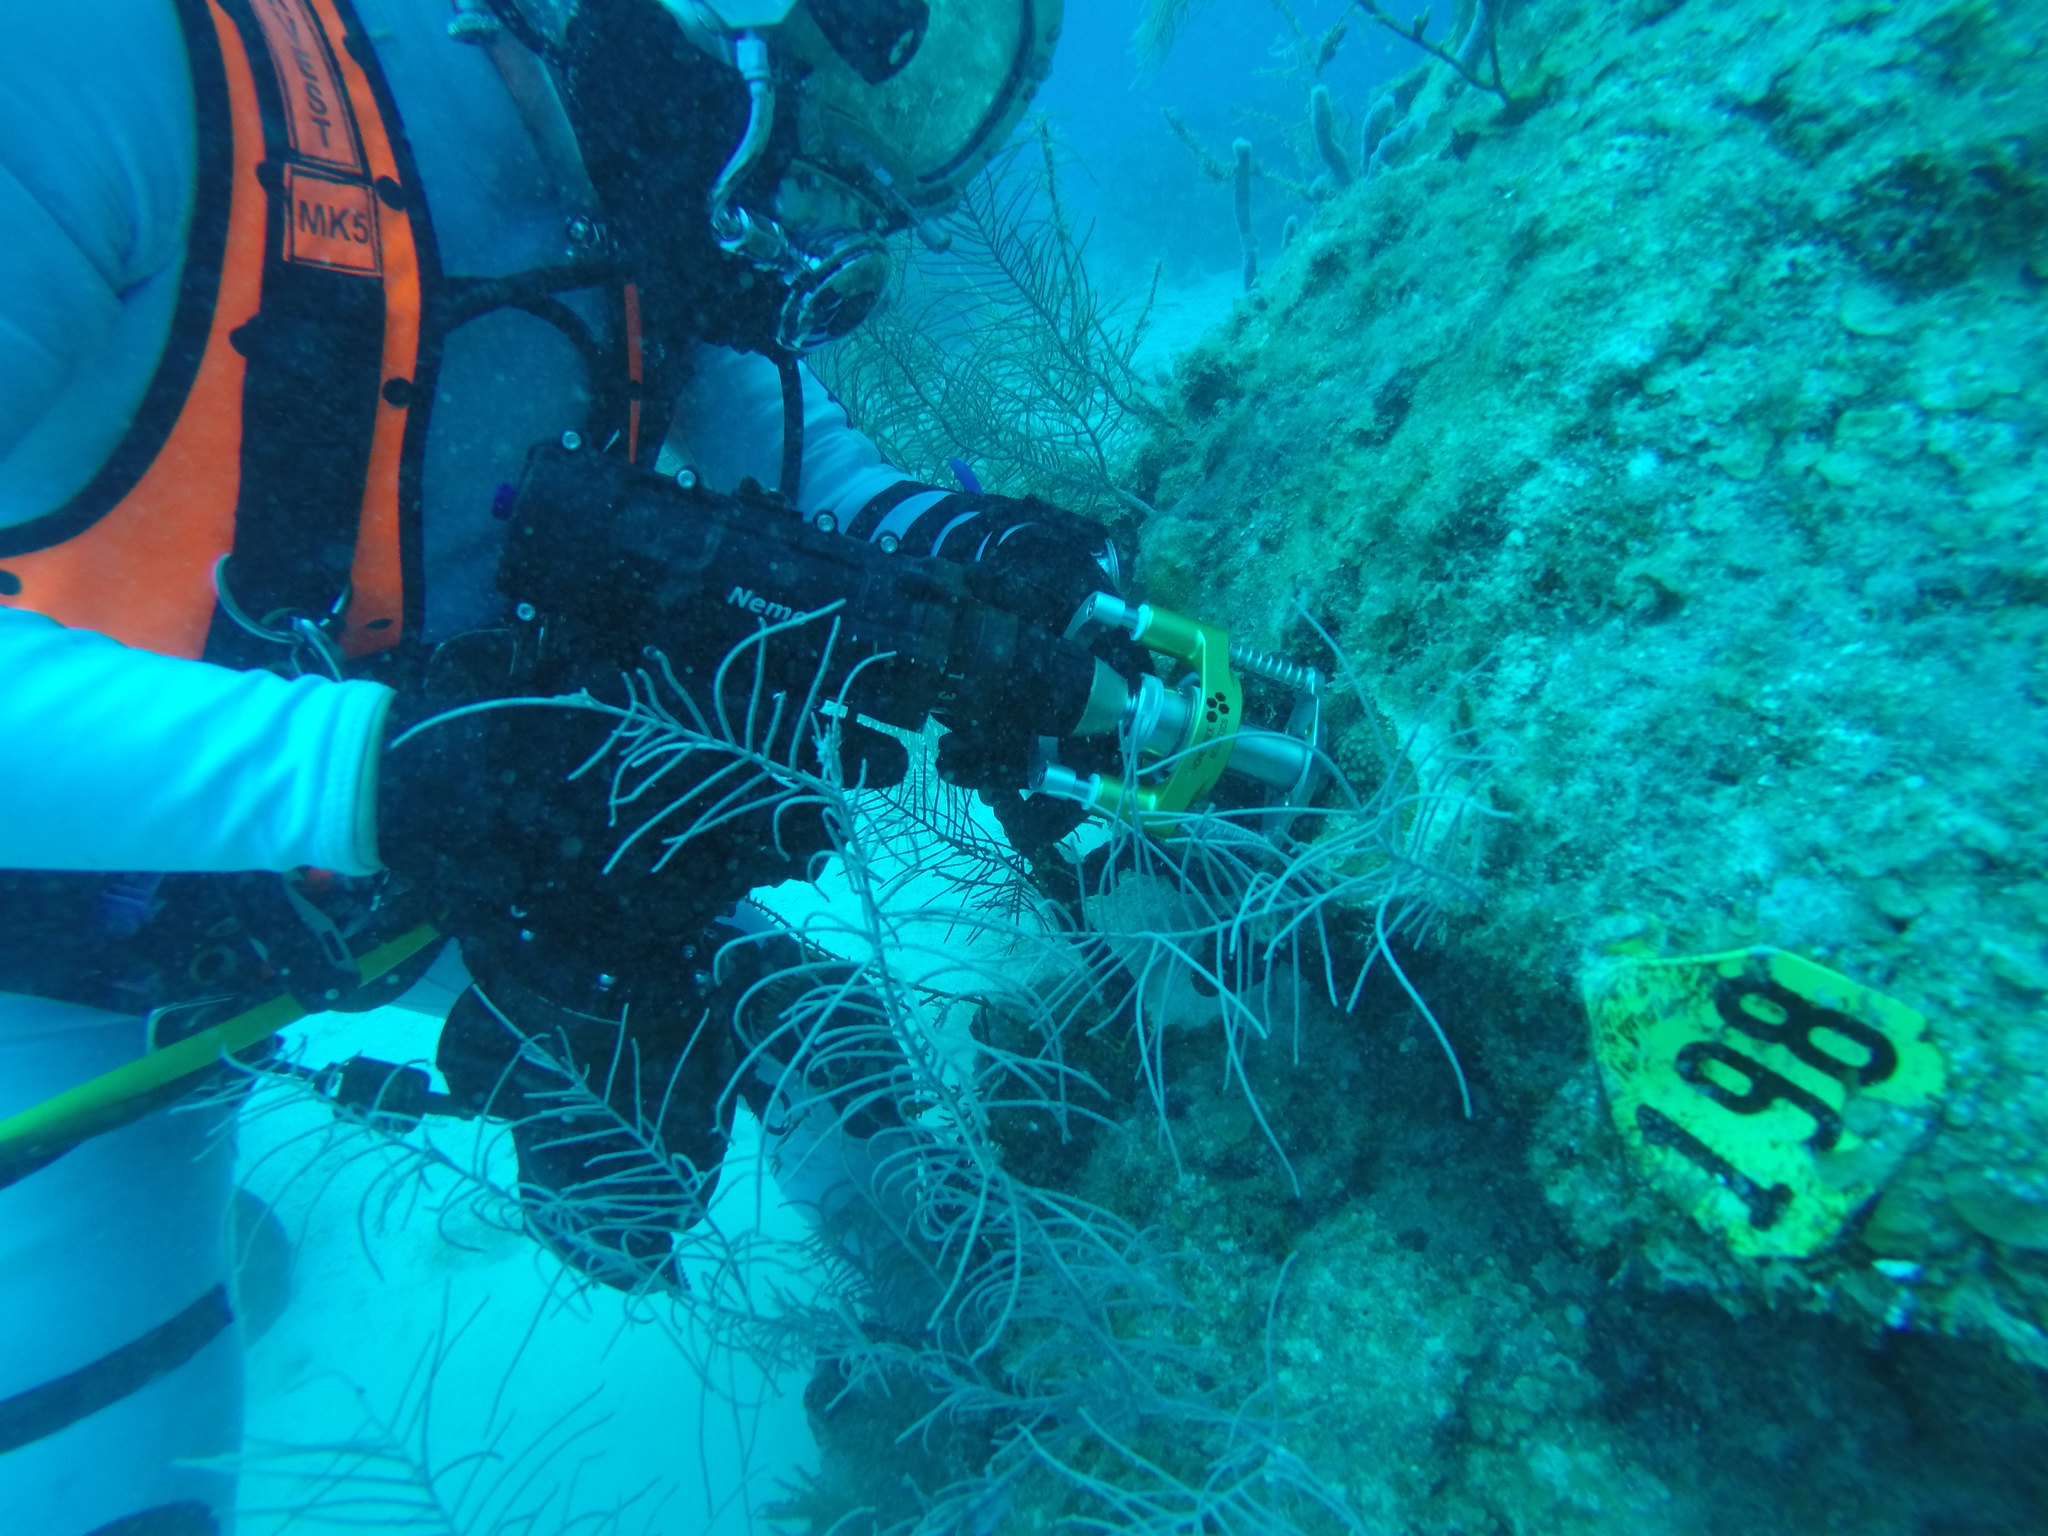 NEEMO 22 diver collecting coral research samples